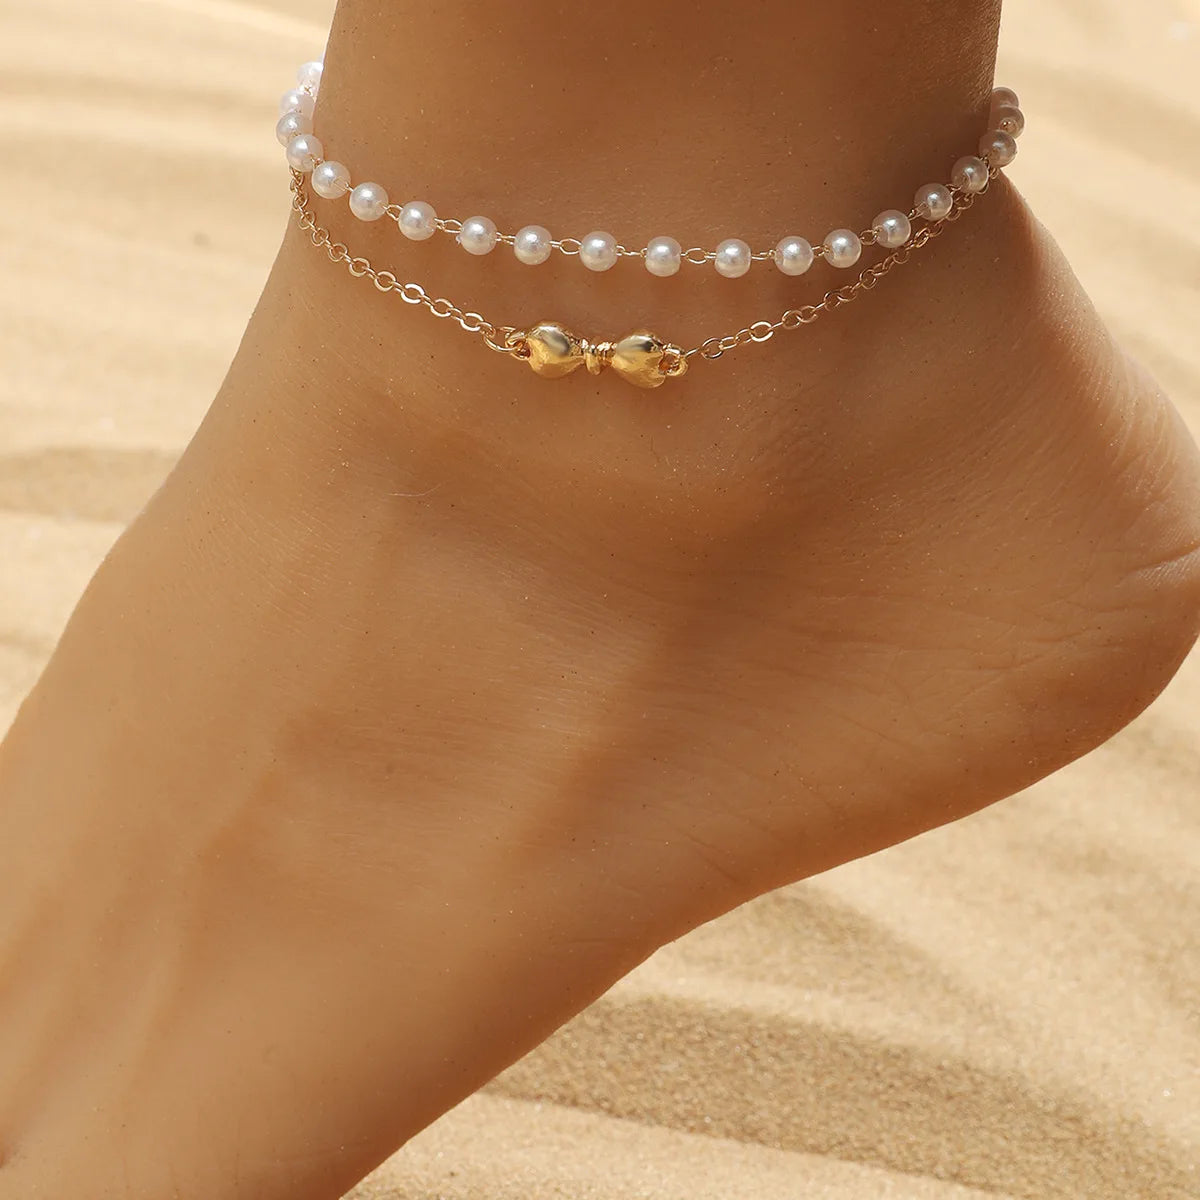 Pearl Bead Anklet for Women Foot Jewelry Accessories Stainless Steel Leg Bracelet Trend Body Chain Aesthetic Barefoot Decorate-Dollar Bargains Online Shopping Australia